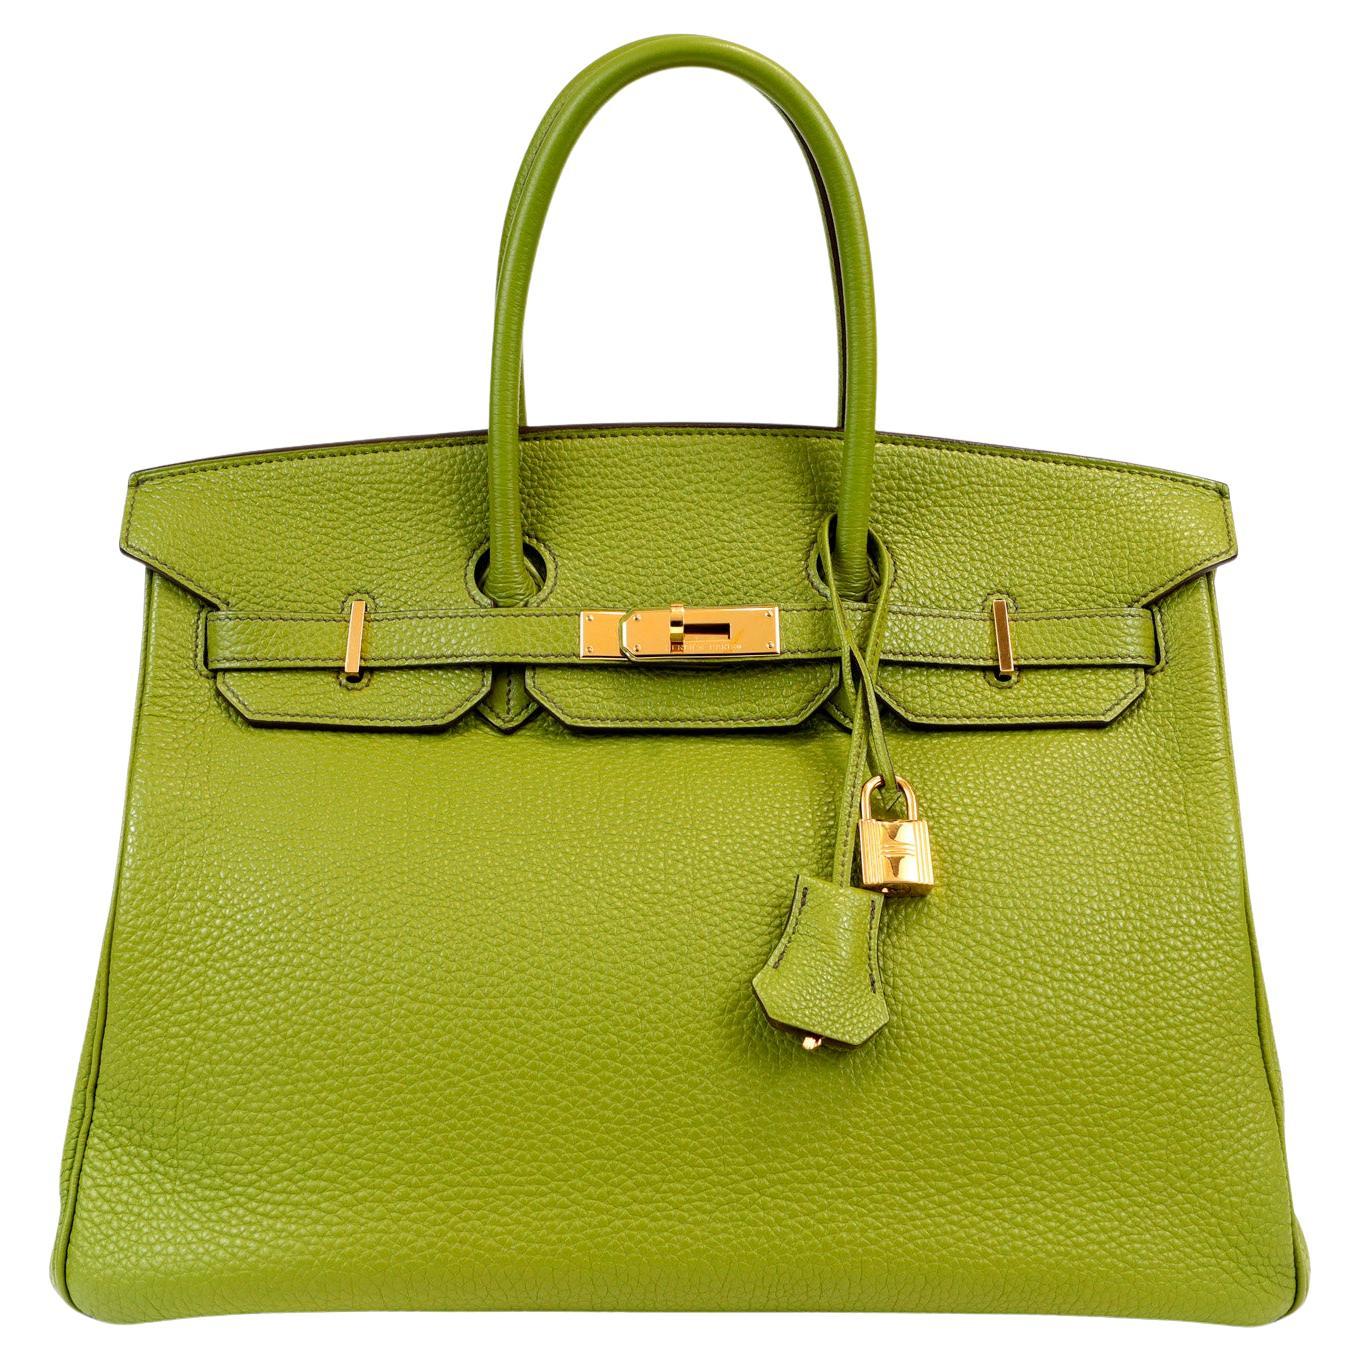 Hermes Kelly bag 28 retourne Vert anis and Anis green Togo leather Silver  hardware